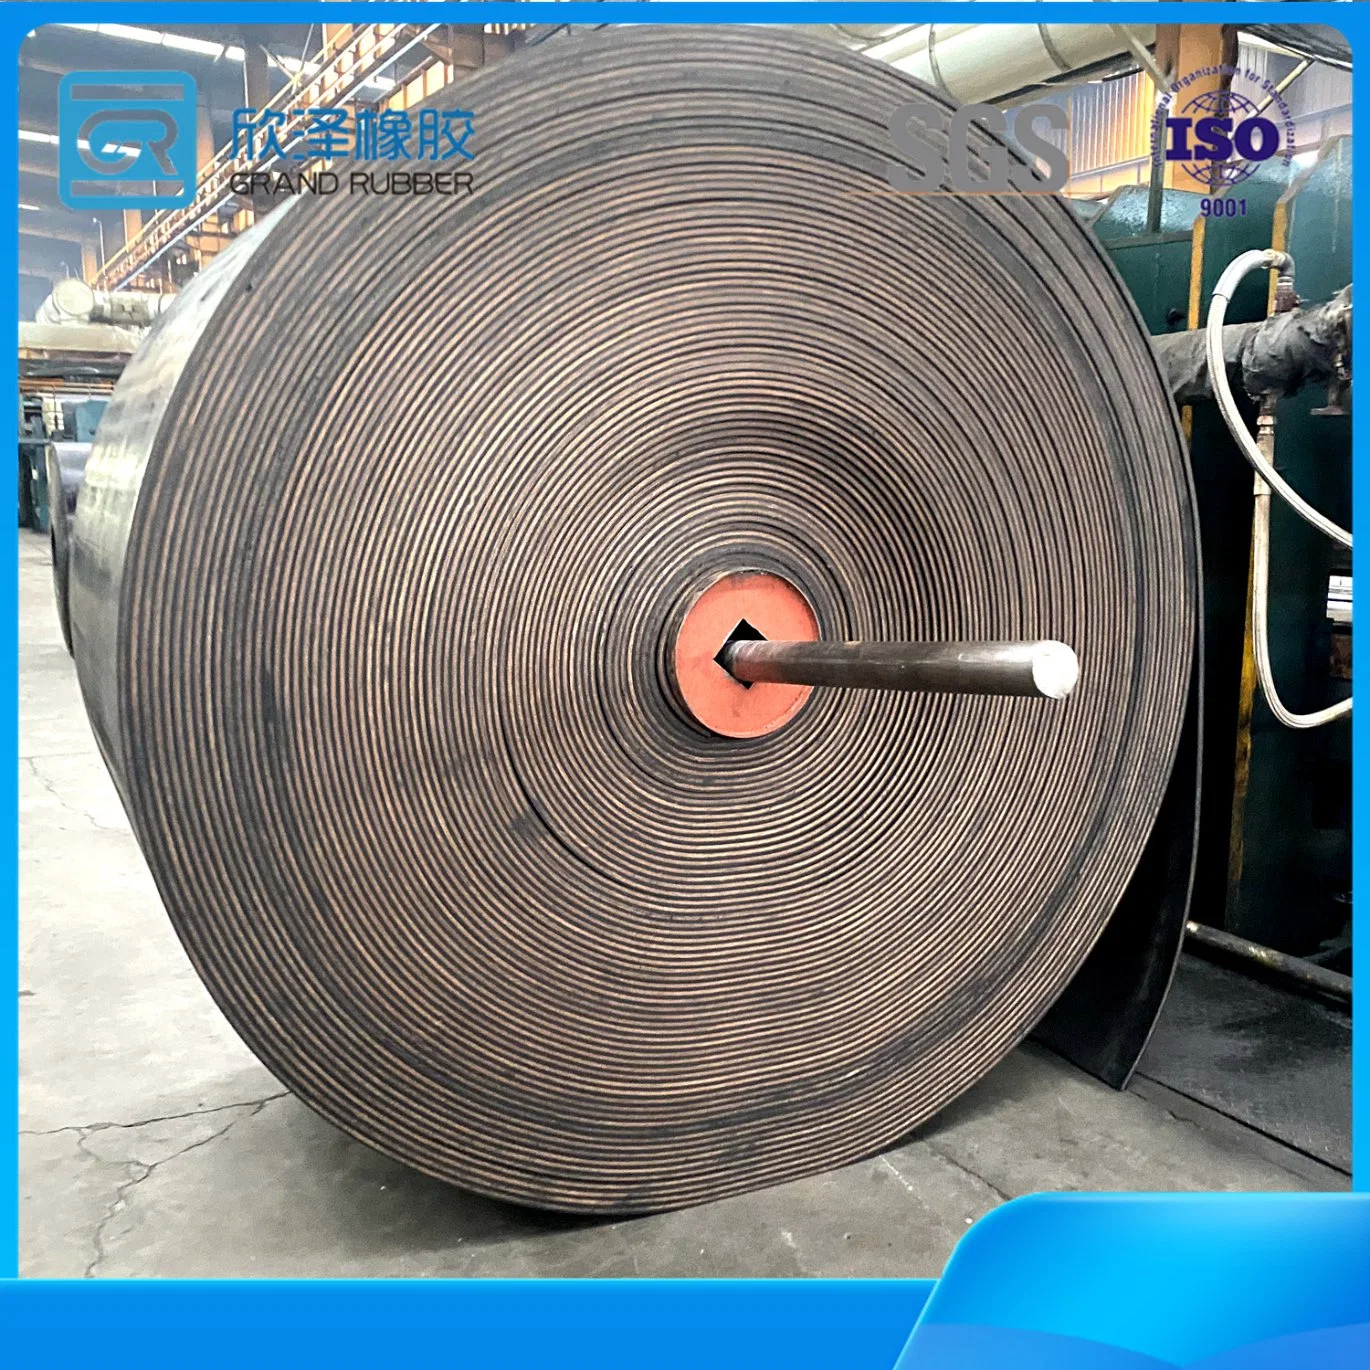 Superior Abrasion Resistant Steel Cord Rubber Conveyor Belt with High Elasticity for Airports, Shipyards, Thermal Power Plants and Other Industries